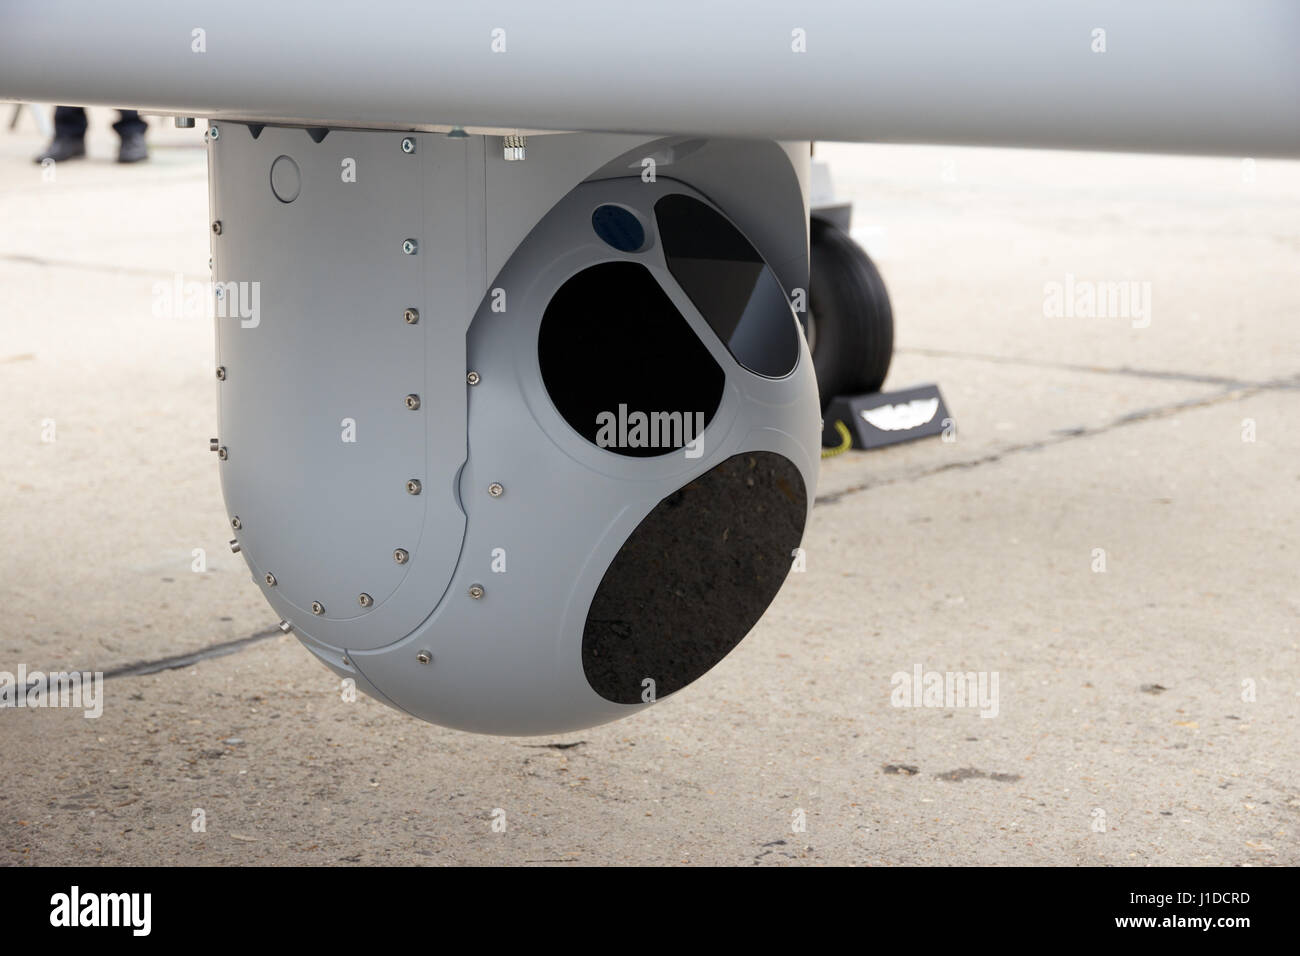 Camera mounted on a UAV drone Stock Photo